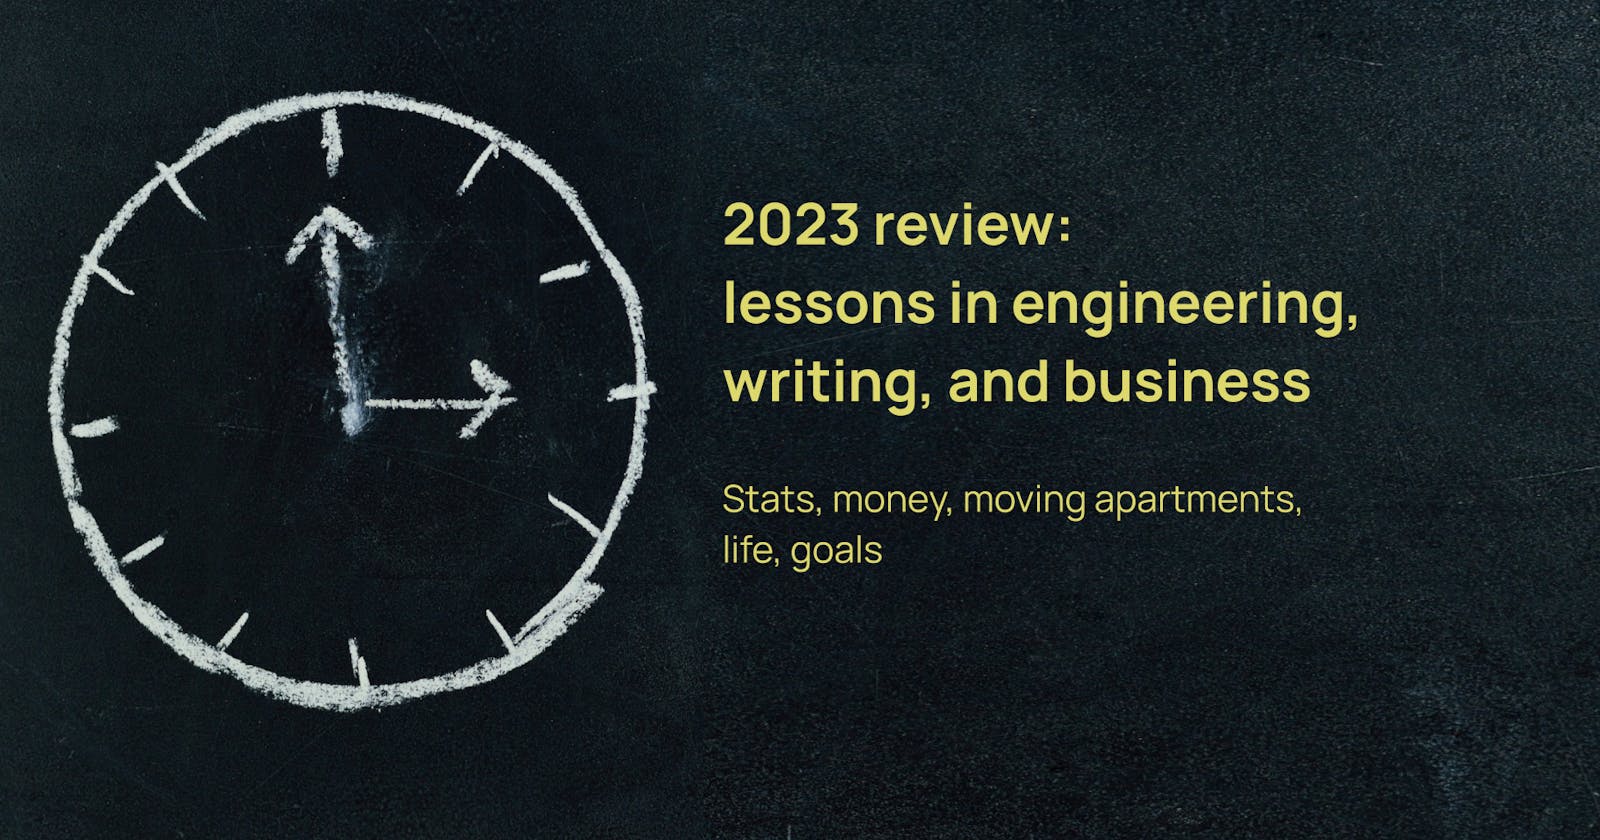 2023 review: lessons in engineering, writing, and business